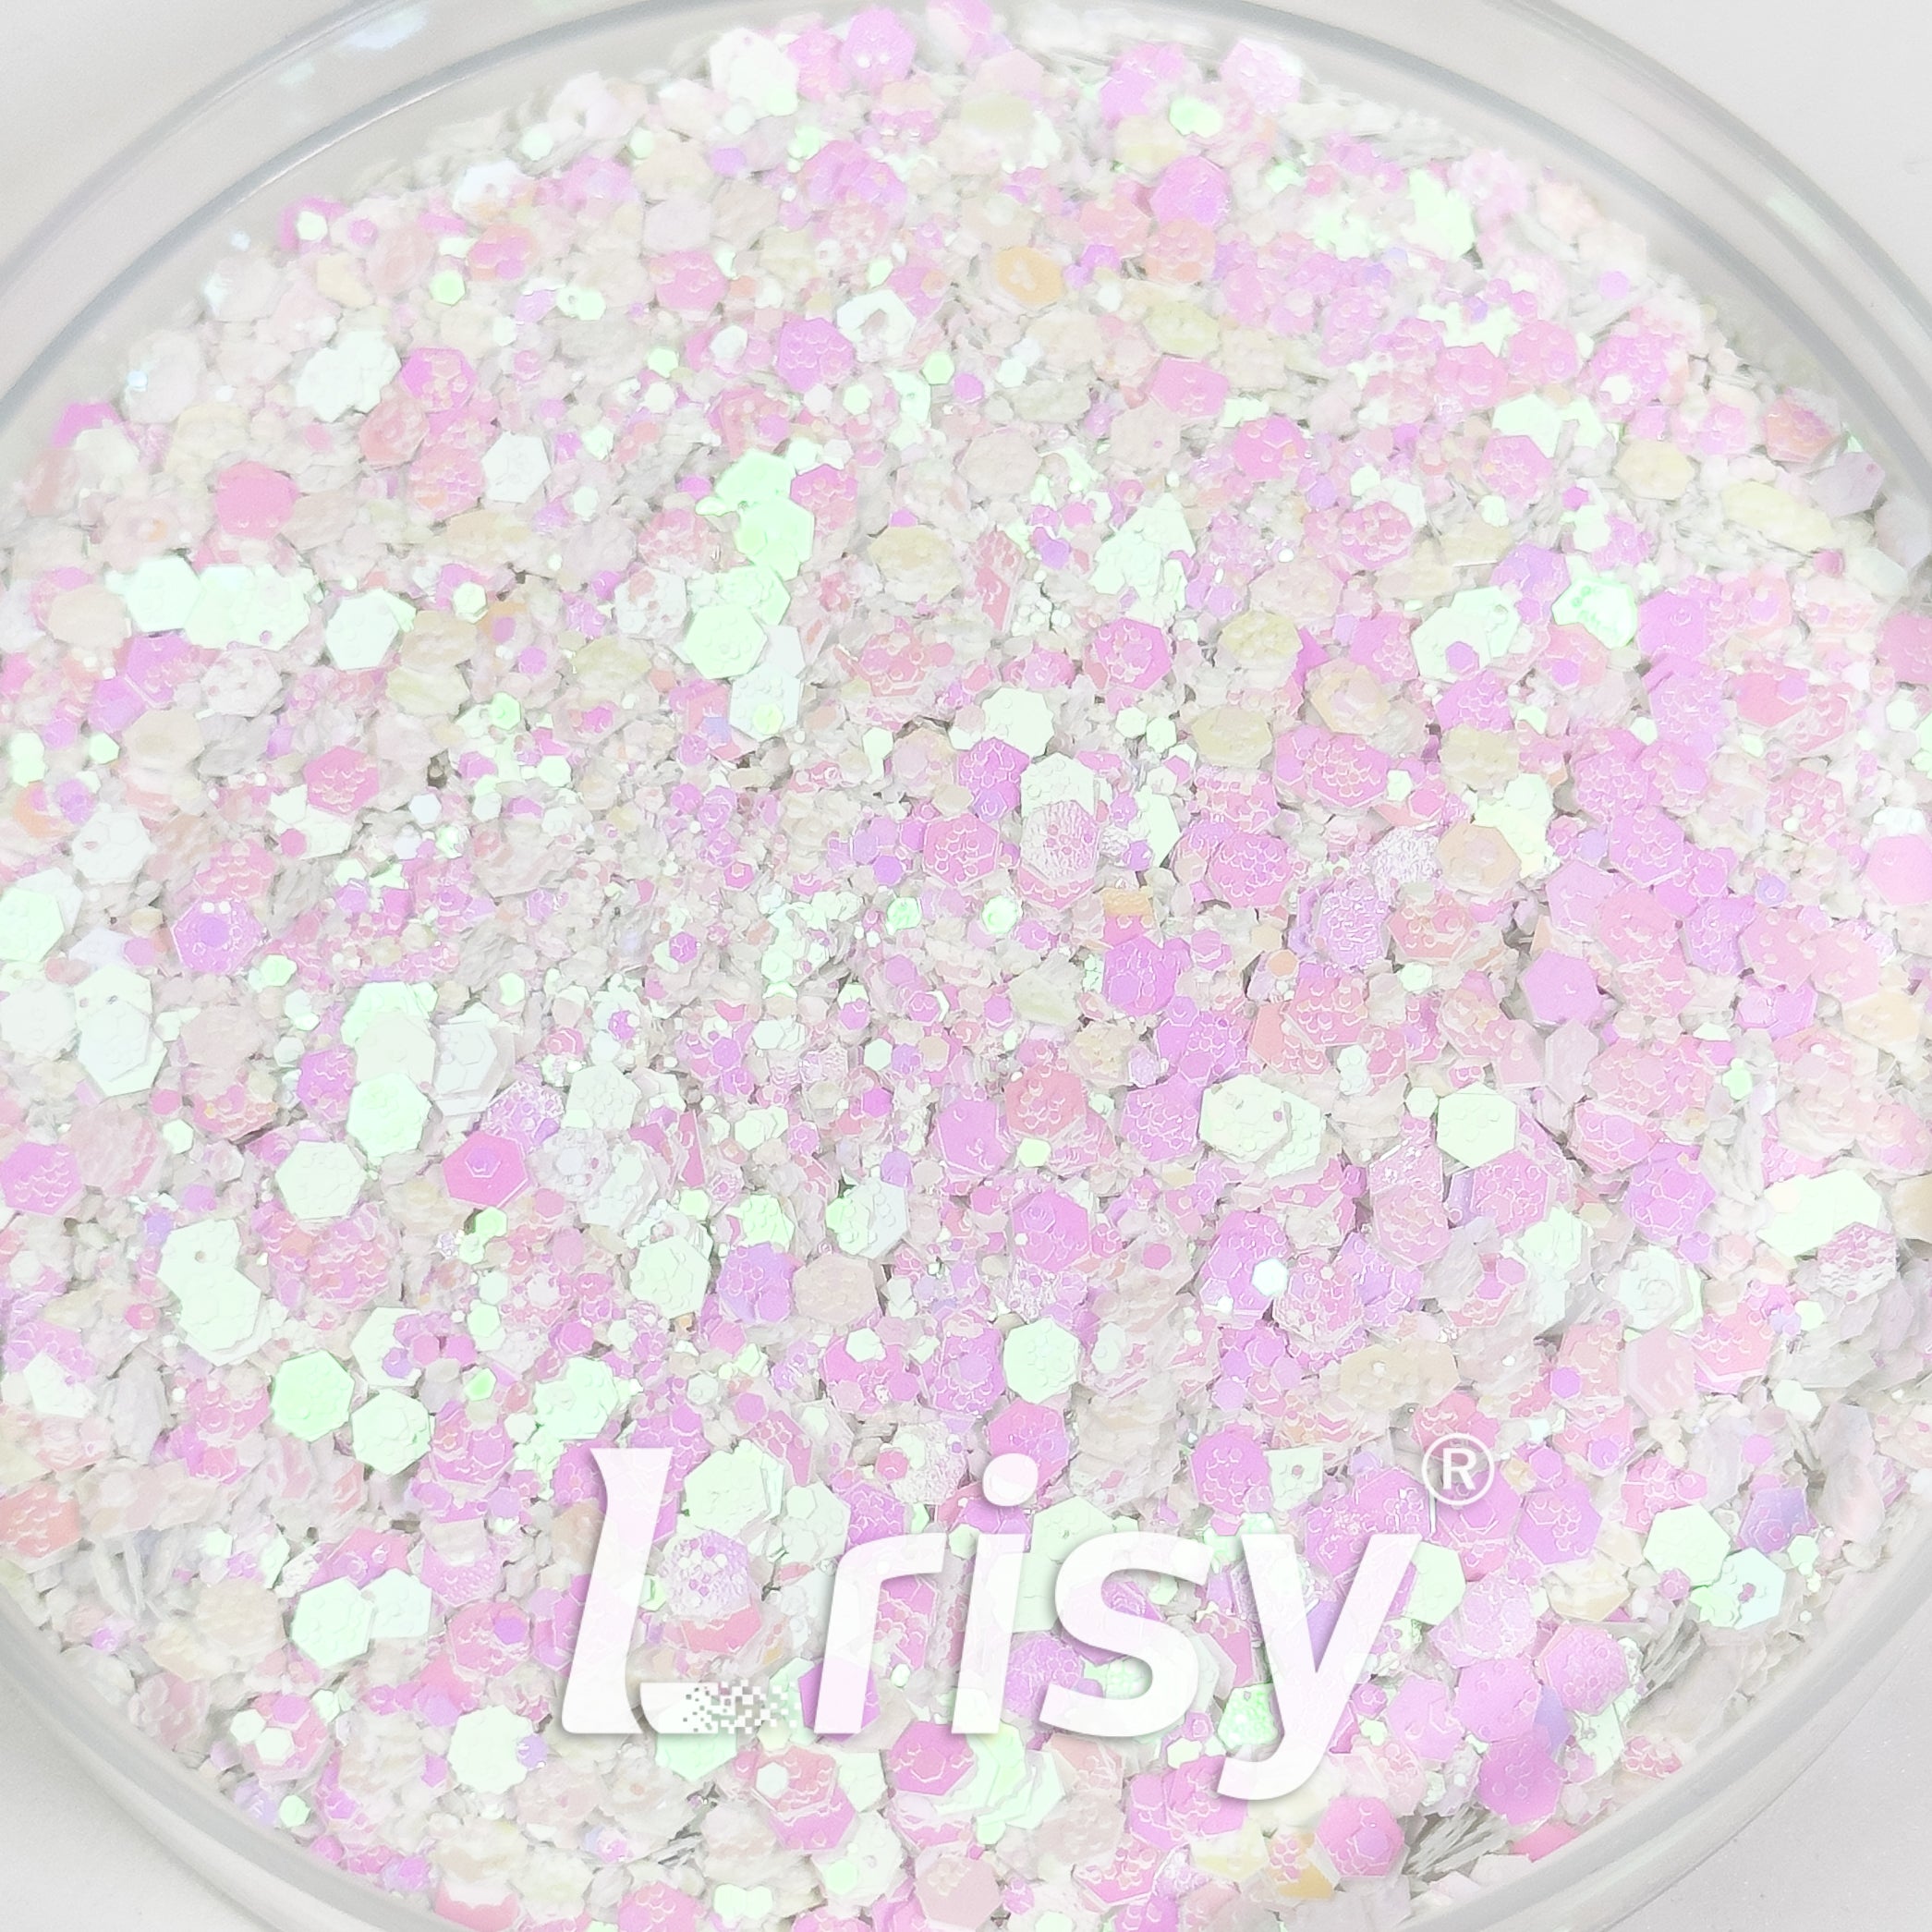 General Mixed Violet Glitter C003R